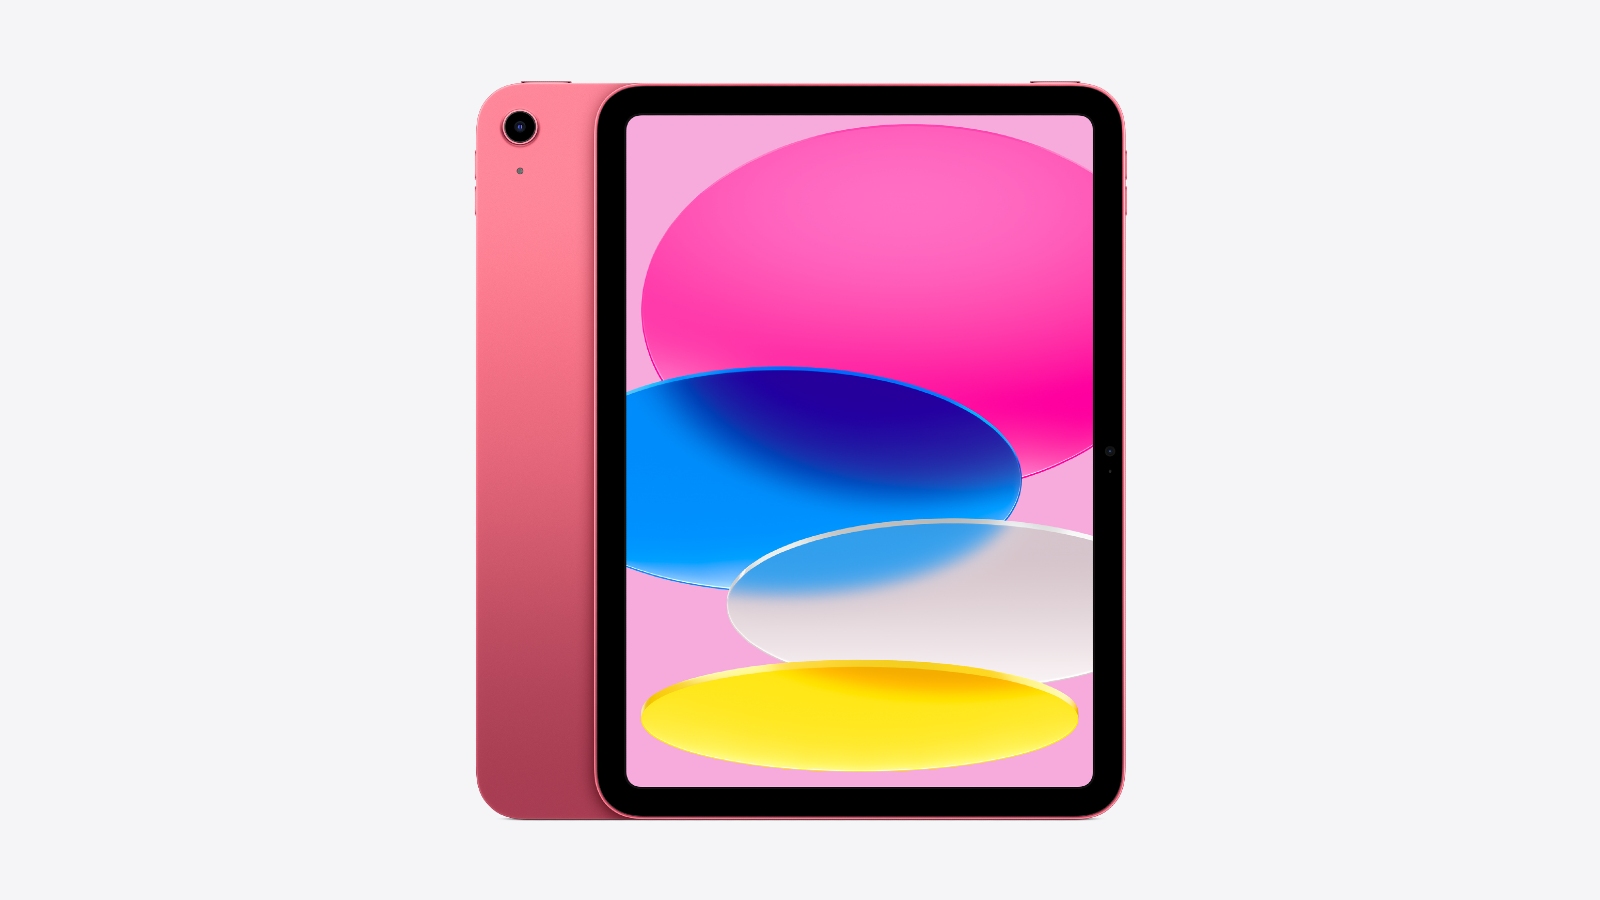 android, ipad (10th gen) price drops ahead of apple’s ‘let loose’ may 7 event